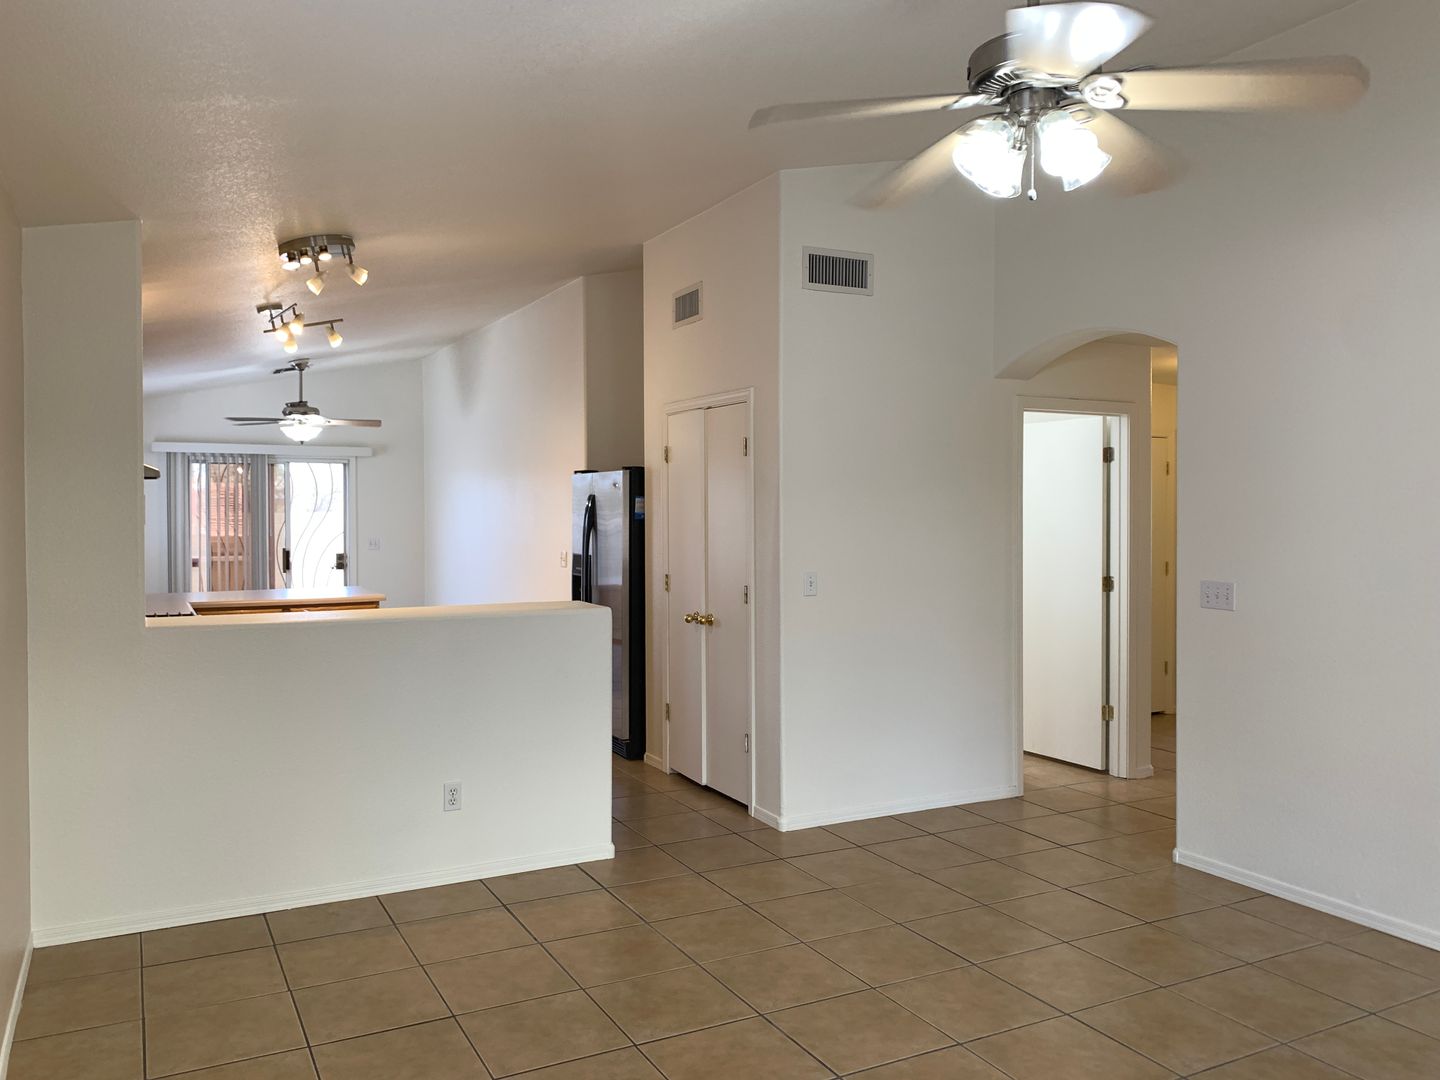 Welcome to 2439 S Saint Pablo Dr., a spacious 3 bedroom, 2 bathroom home located in Tucson, AZ